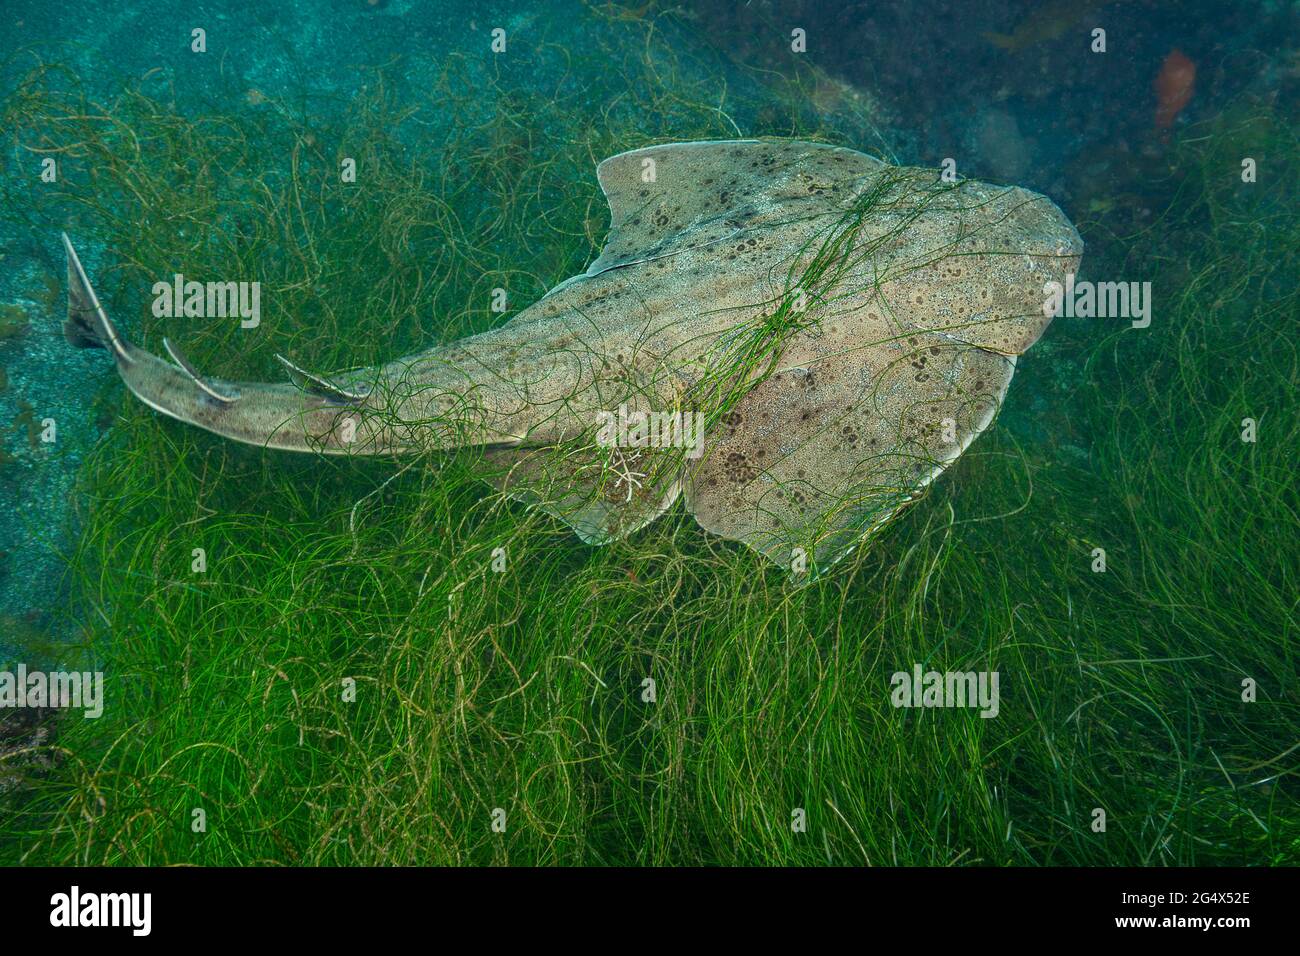 The Pacific angel shark, Squatina californica, with itÕs flat body and huge, wing-like pectoral fins looks somewhat more like a ray than a shark. ItÕs Stock Photo